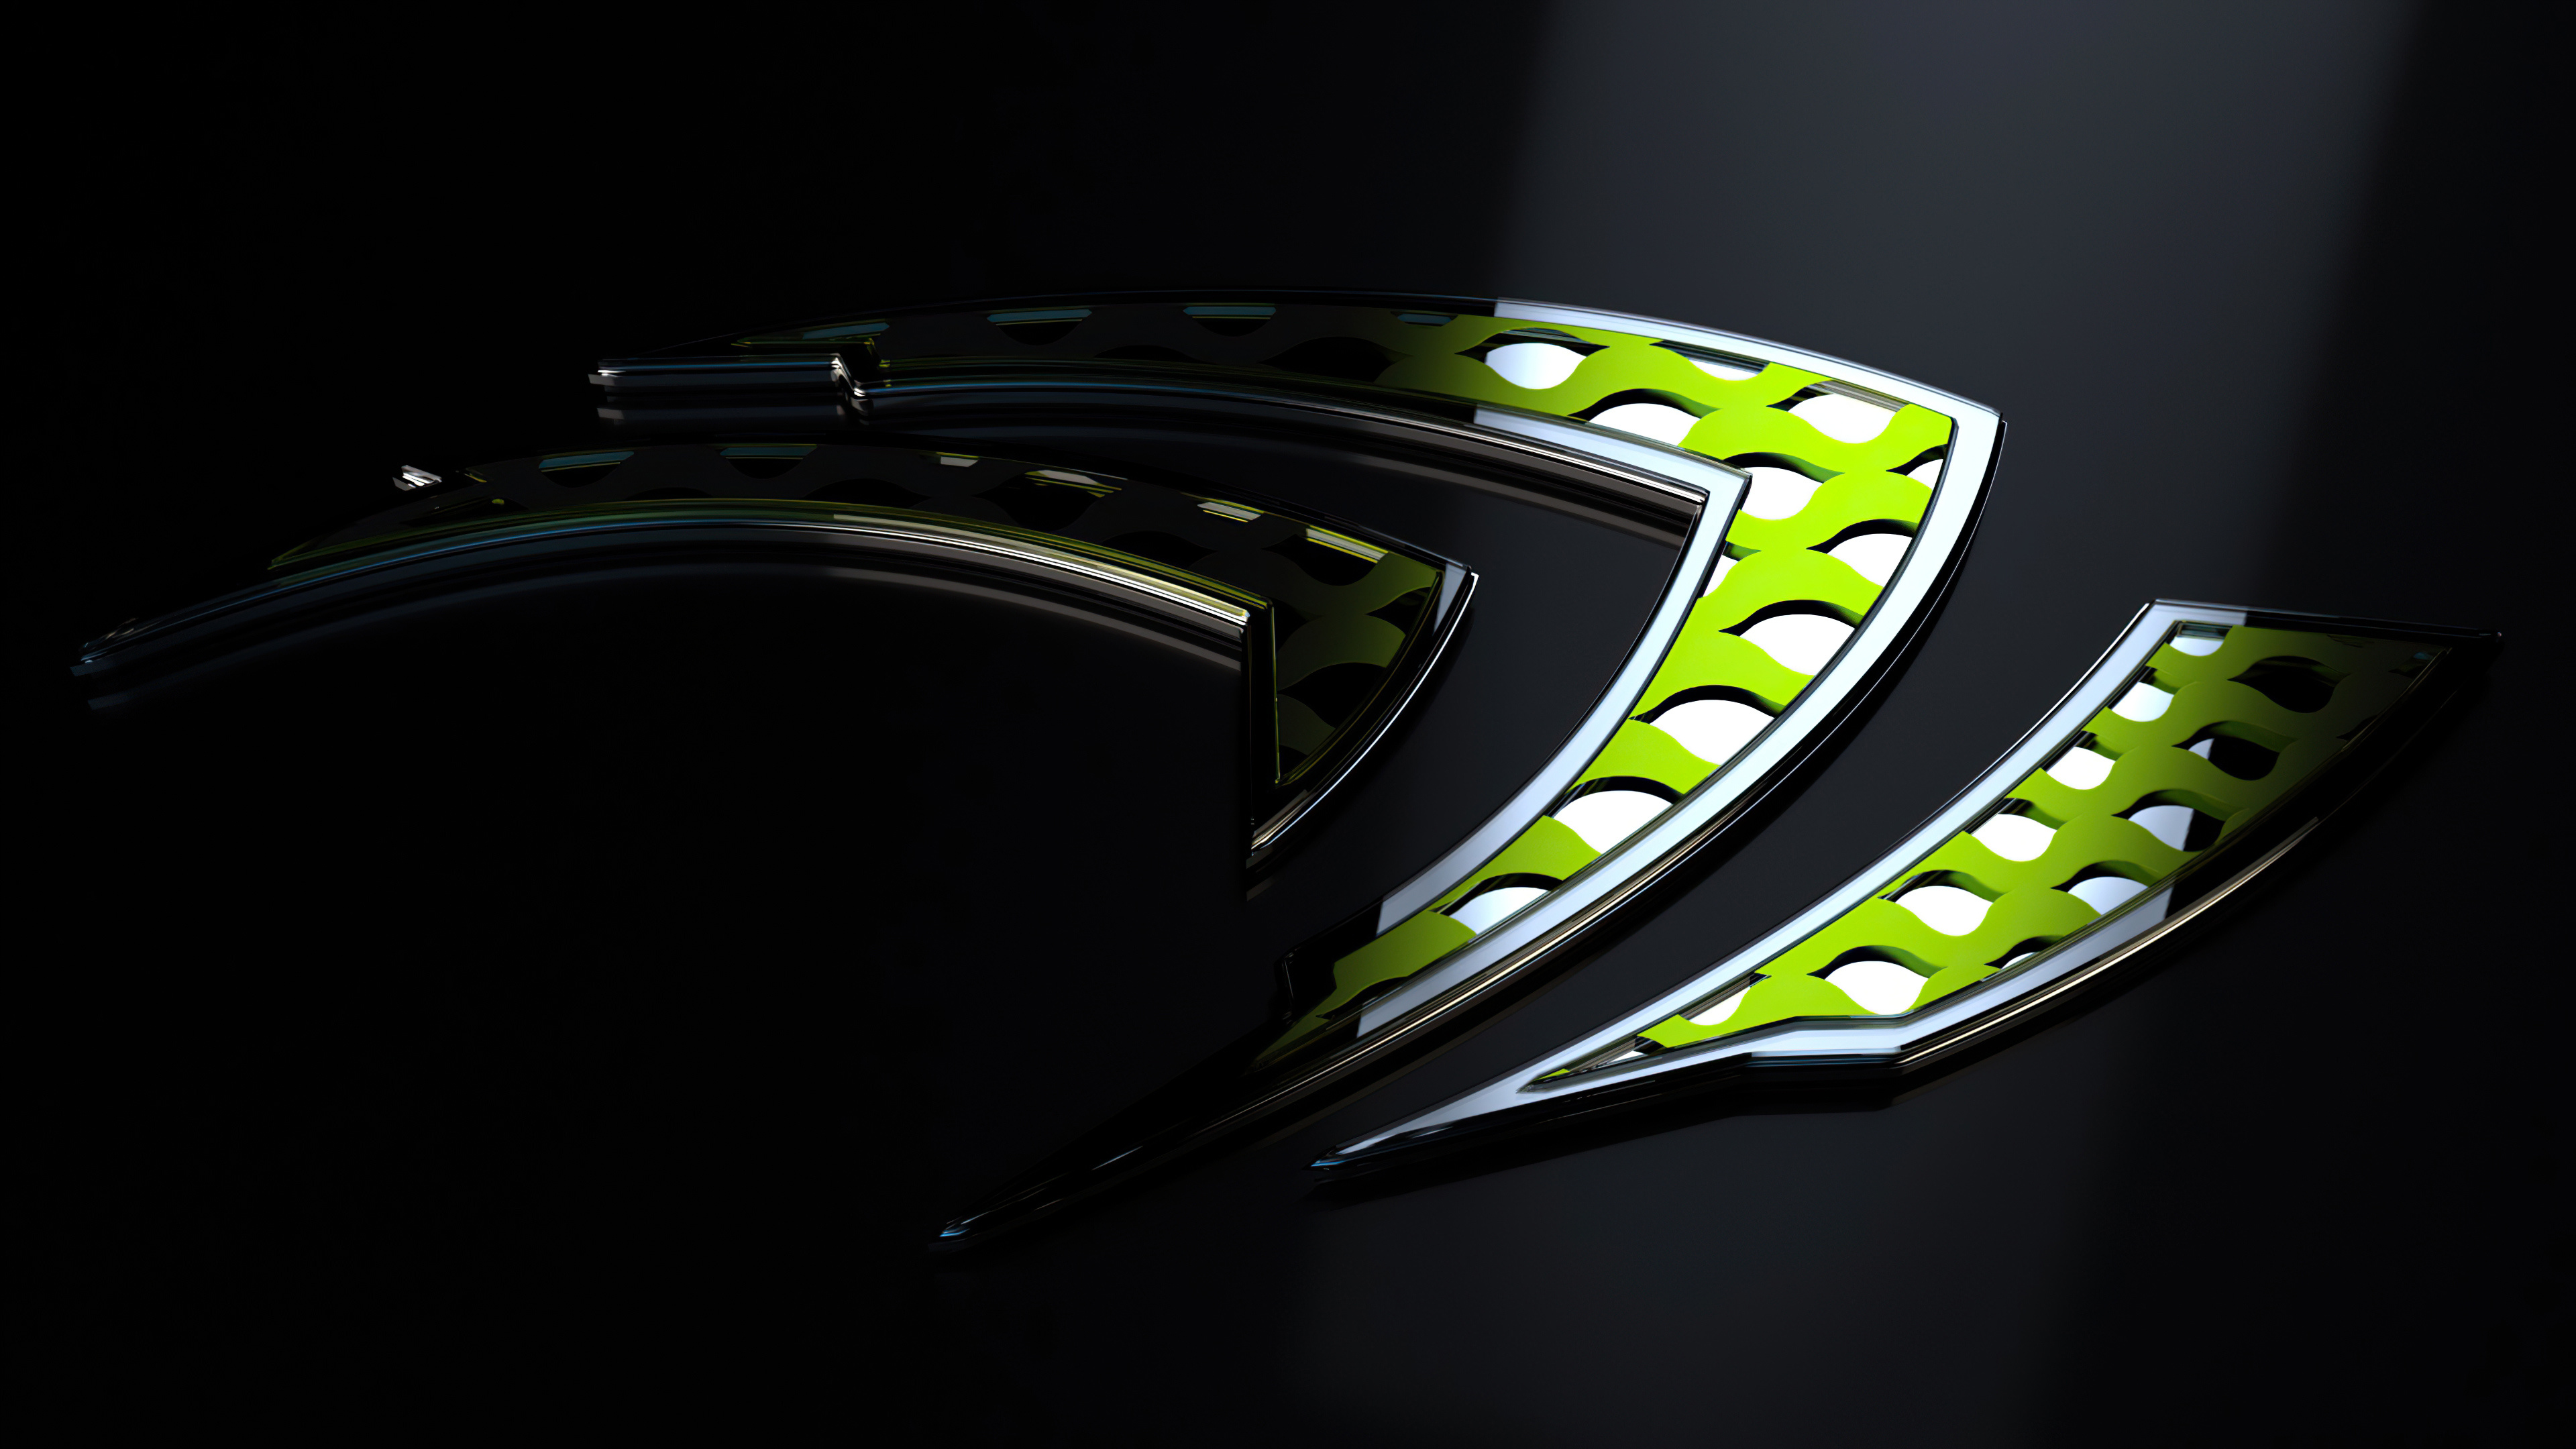 Nvidia: American multinational technology company, Founded by its current CEO, Jensen Huang. 3840x2160 4K Wallpaper.